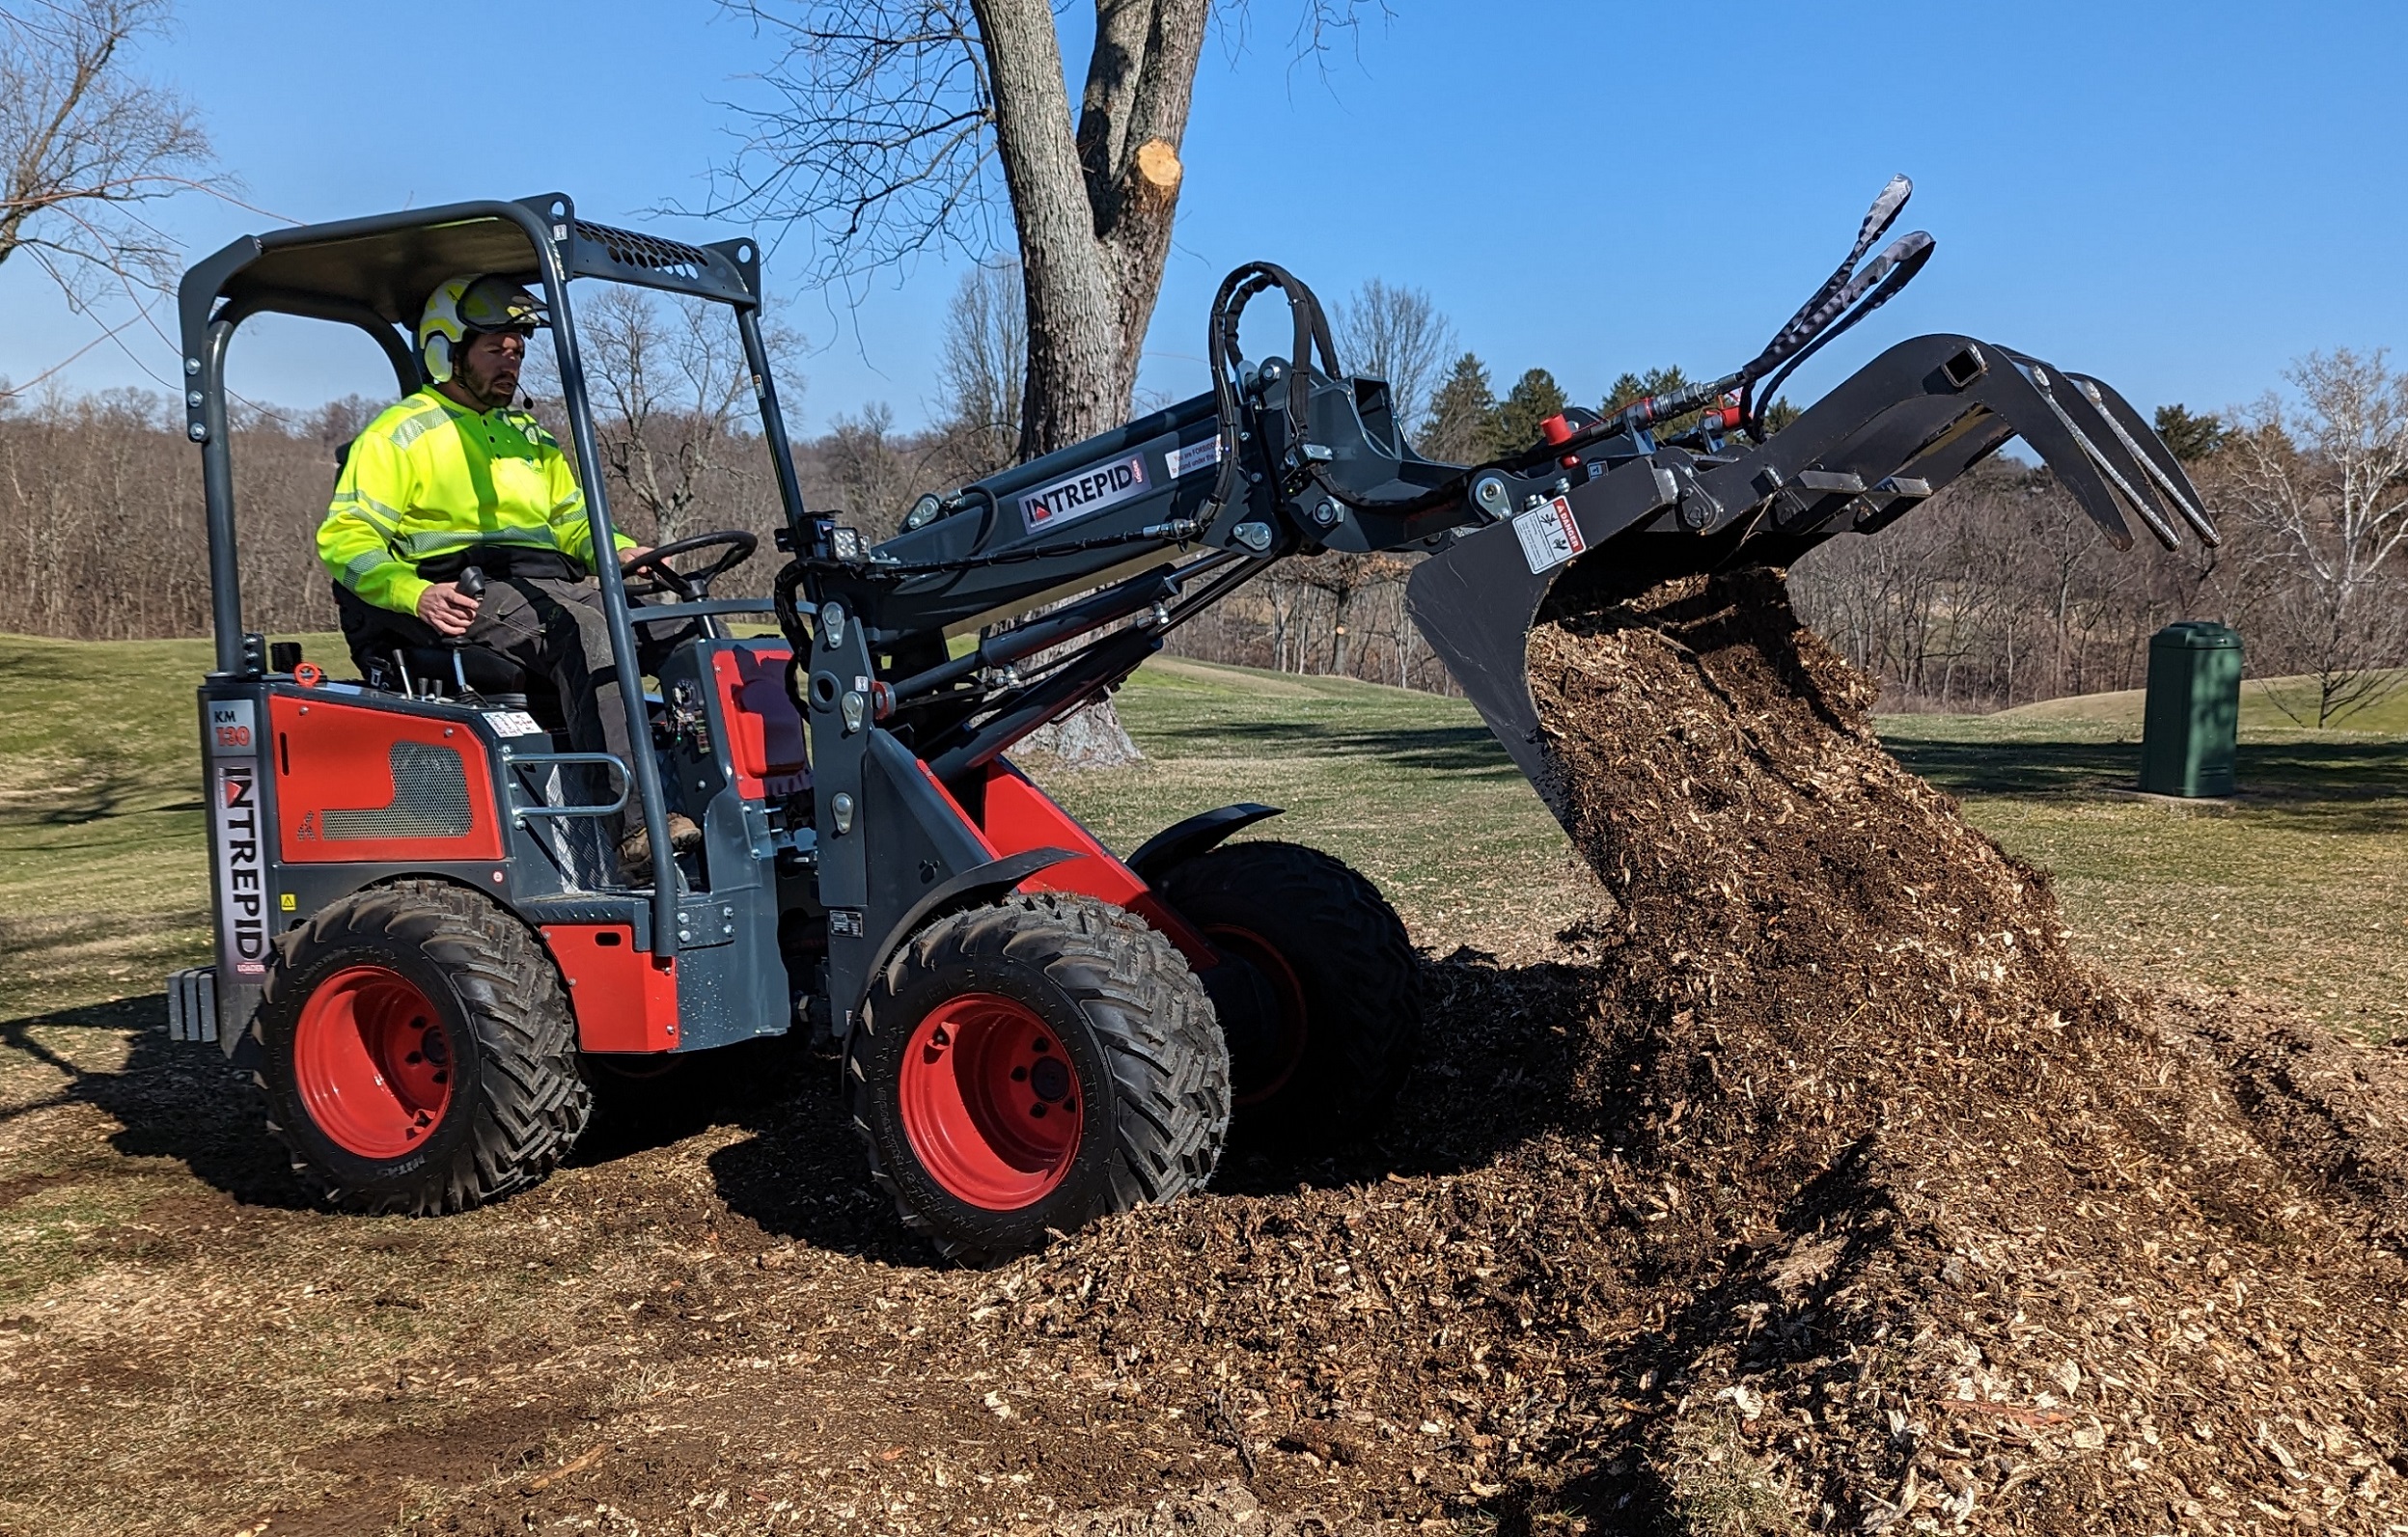 Compact wheel loader with grapple bucket moving mulch